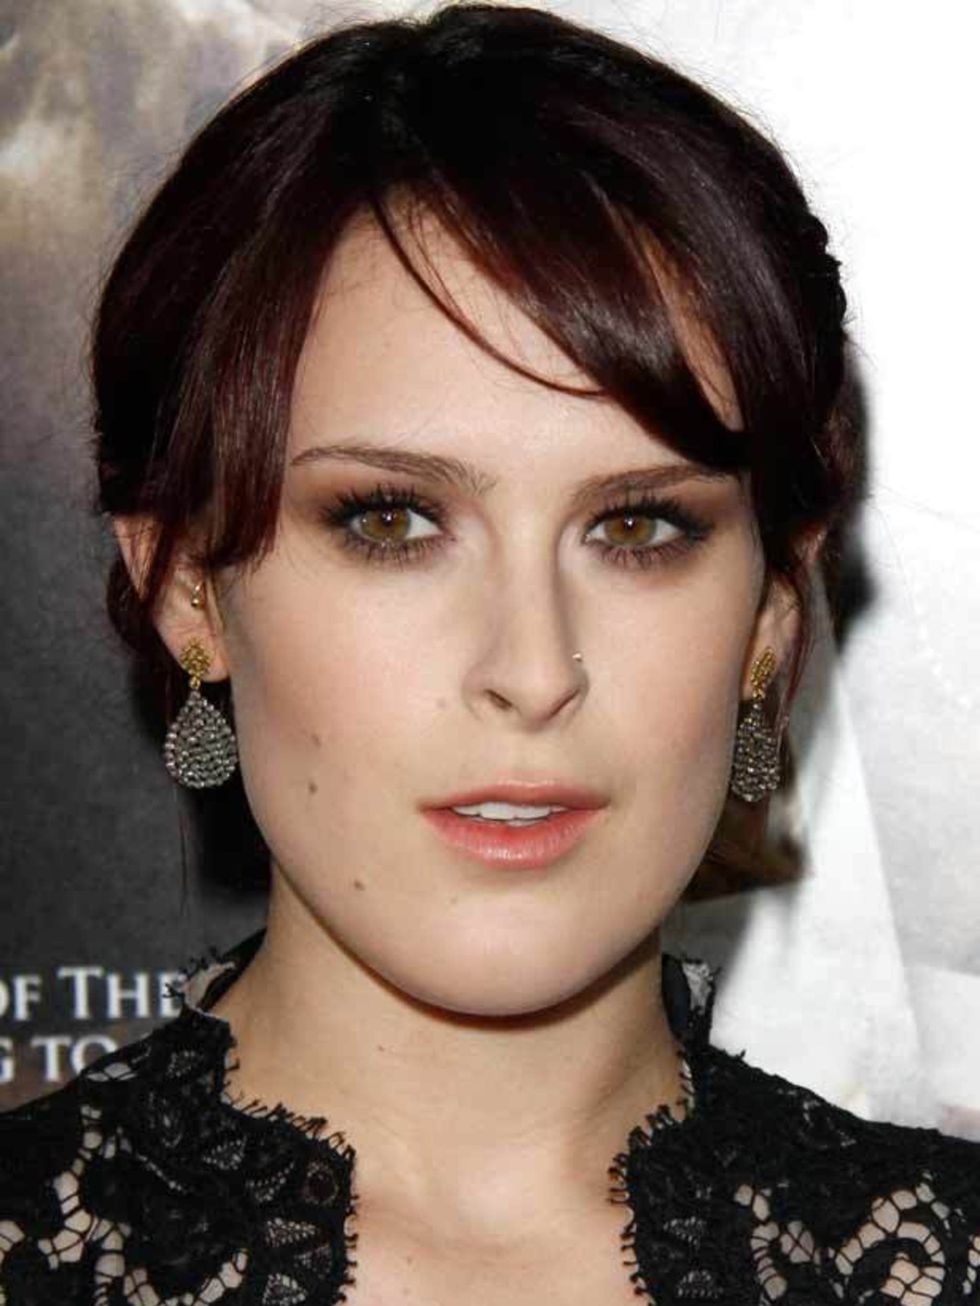 <p><a href="http://www.elleuk.com/starstyle/special-features/%28section%29/Rumer-Willis-New-Look">Click to see more of Rumer Willis' style</a></p>